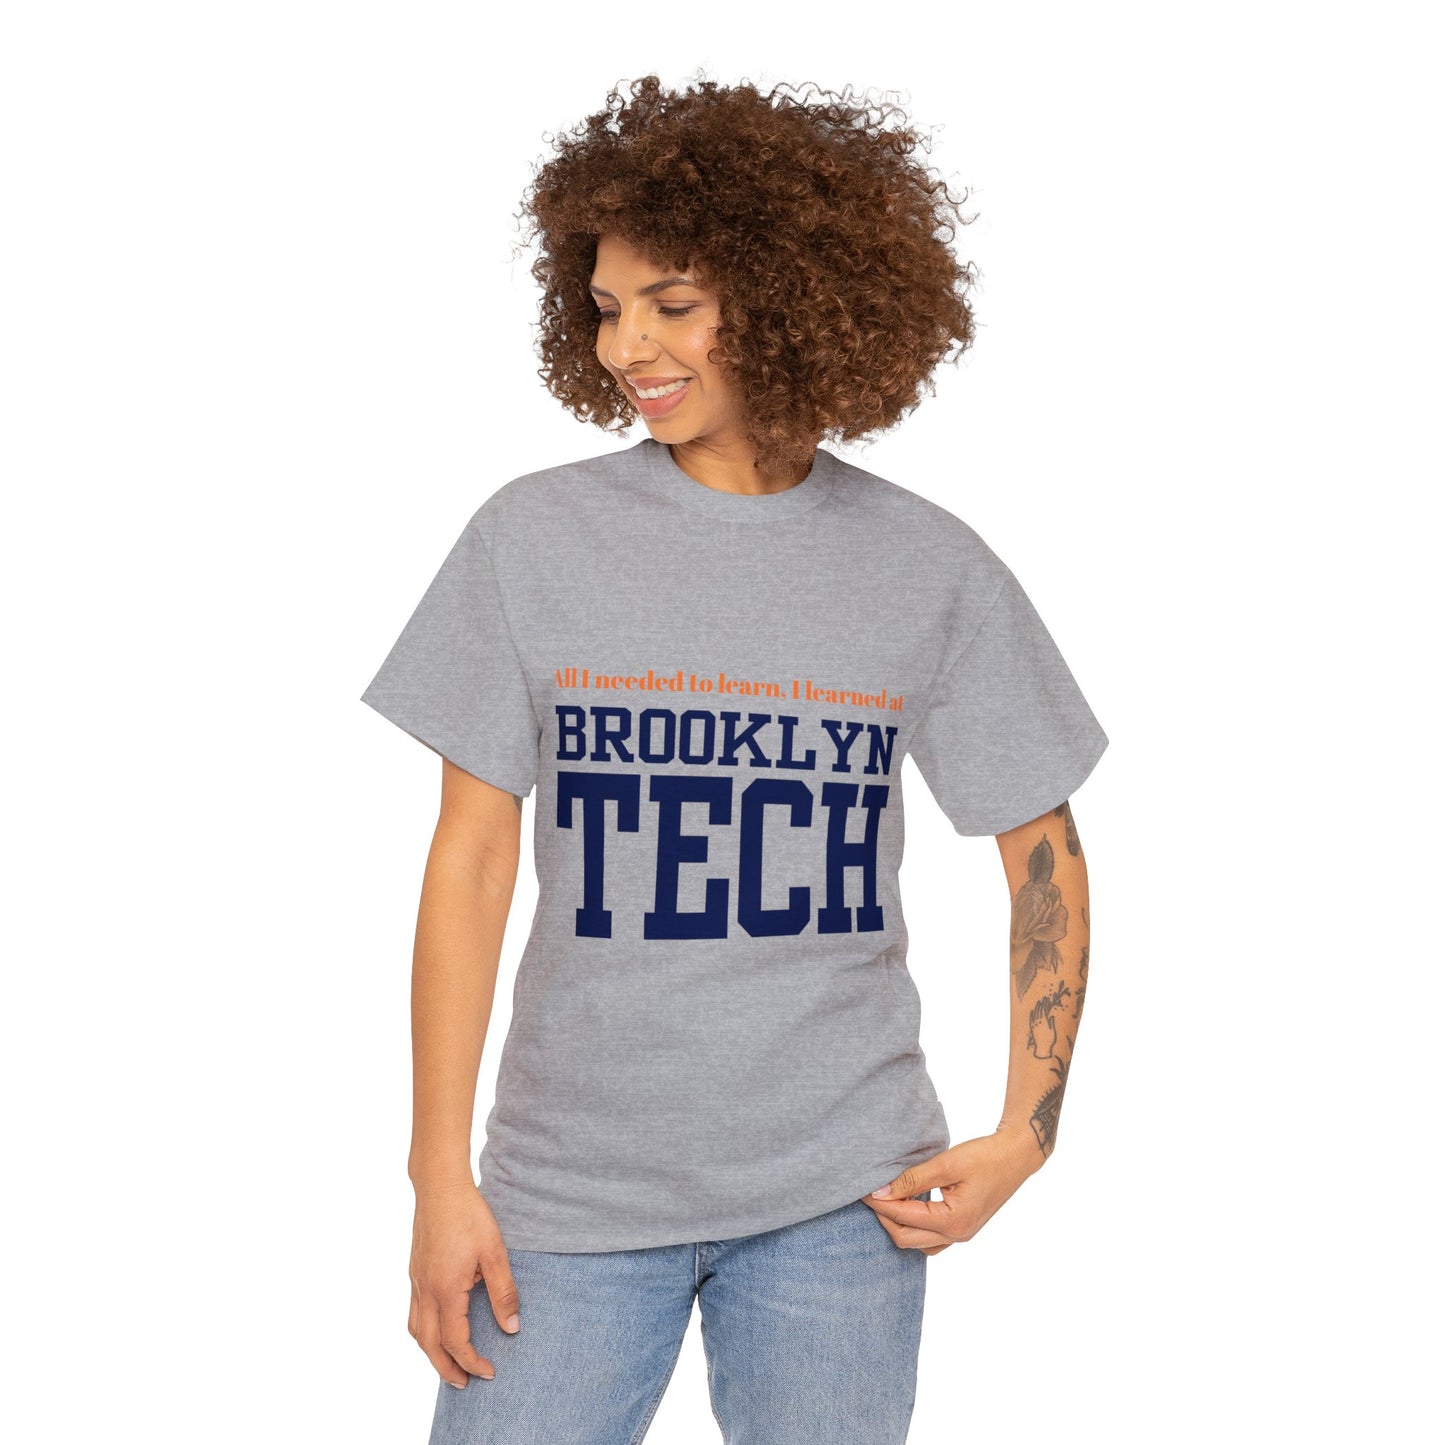 Boutique - "all I Needed To Learn, I Learned At Brooklyn Tech" - Men's Heavy Cotton T-Shirt